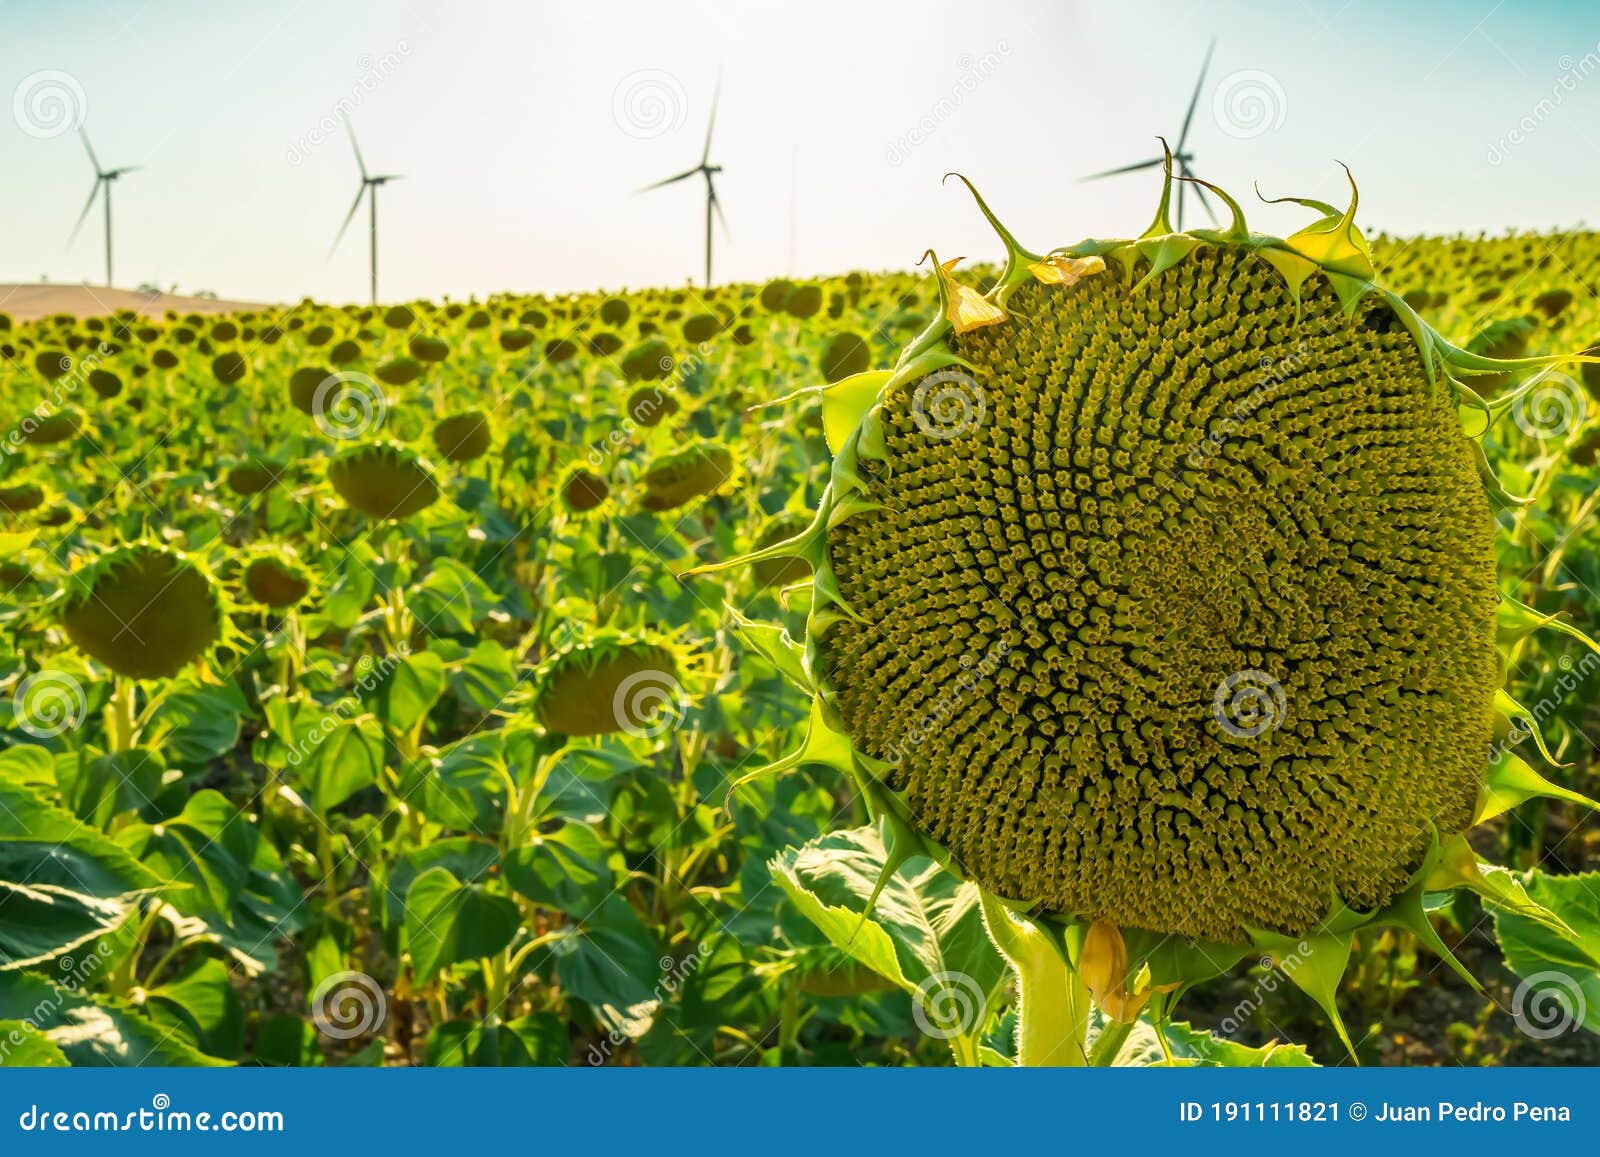 green sunflowers in a sunflower field with wind turbines or windmills